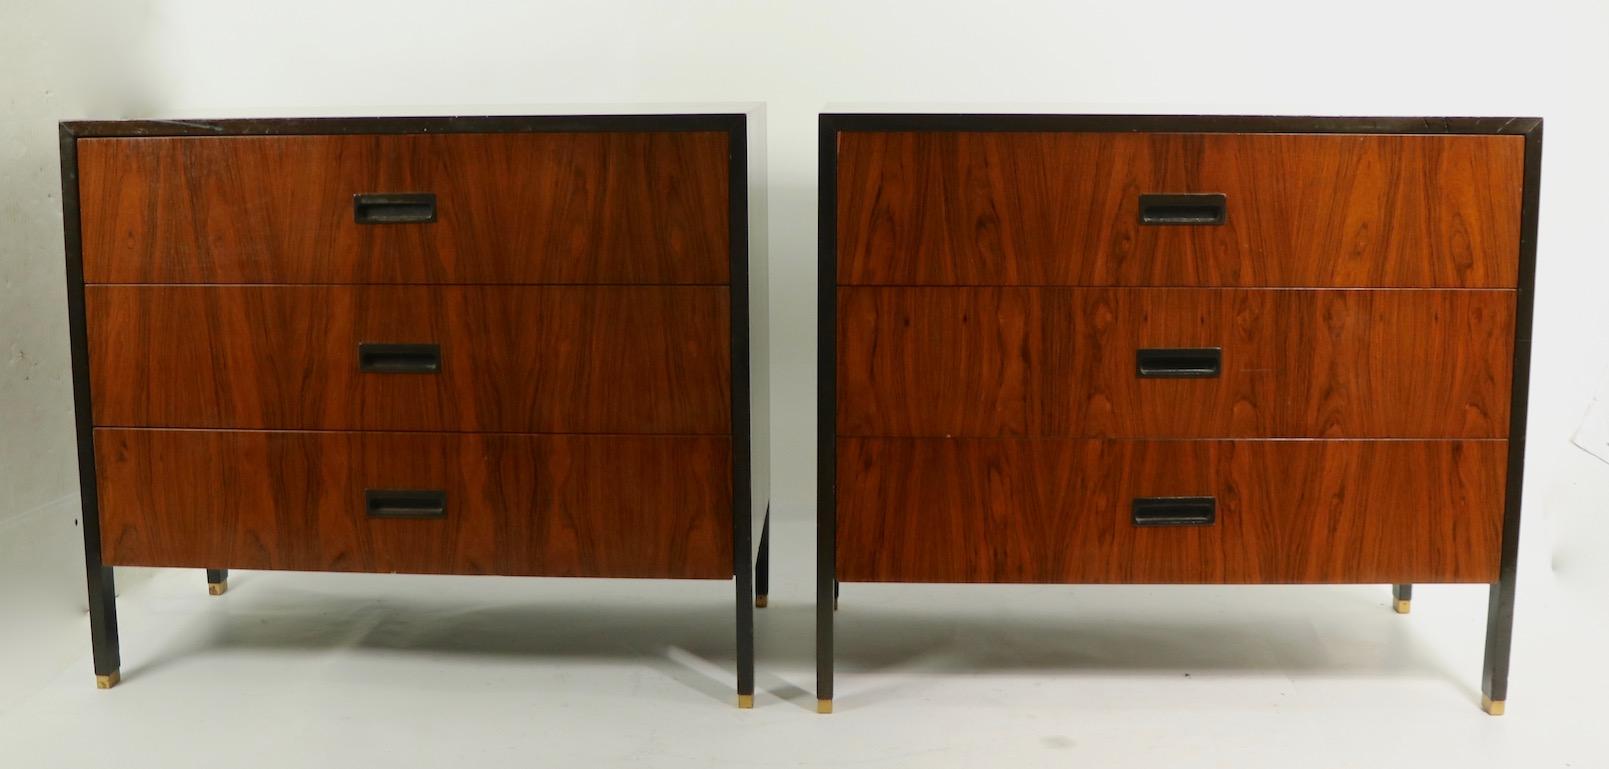 Pair of tailored chests designed by Harvey Probber, having rosewood drawer fronts, tops and sides with dark mahogany trim, and legs, with brass feet. Both are in good, original condition, showing some cosmetic signs of age and use. Each dresser has